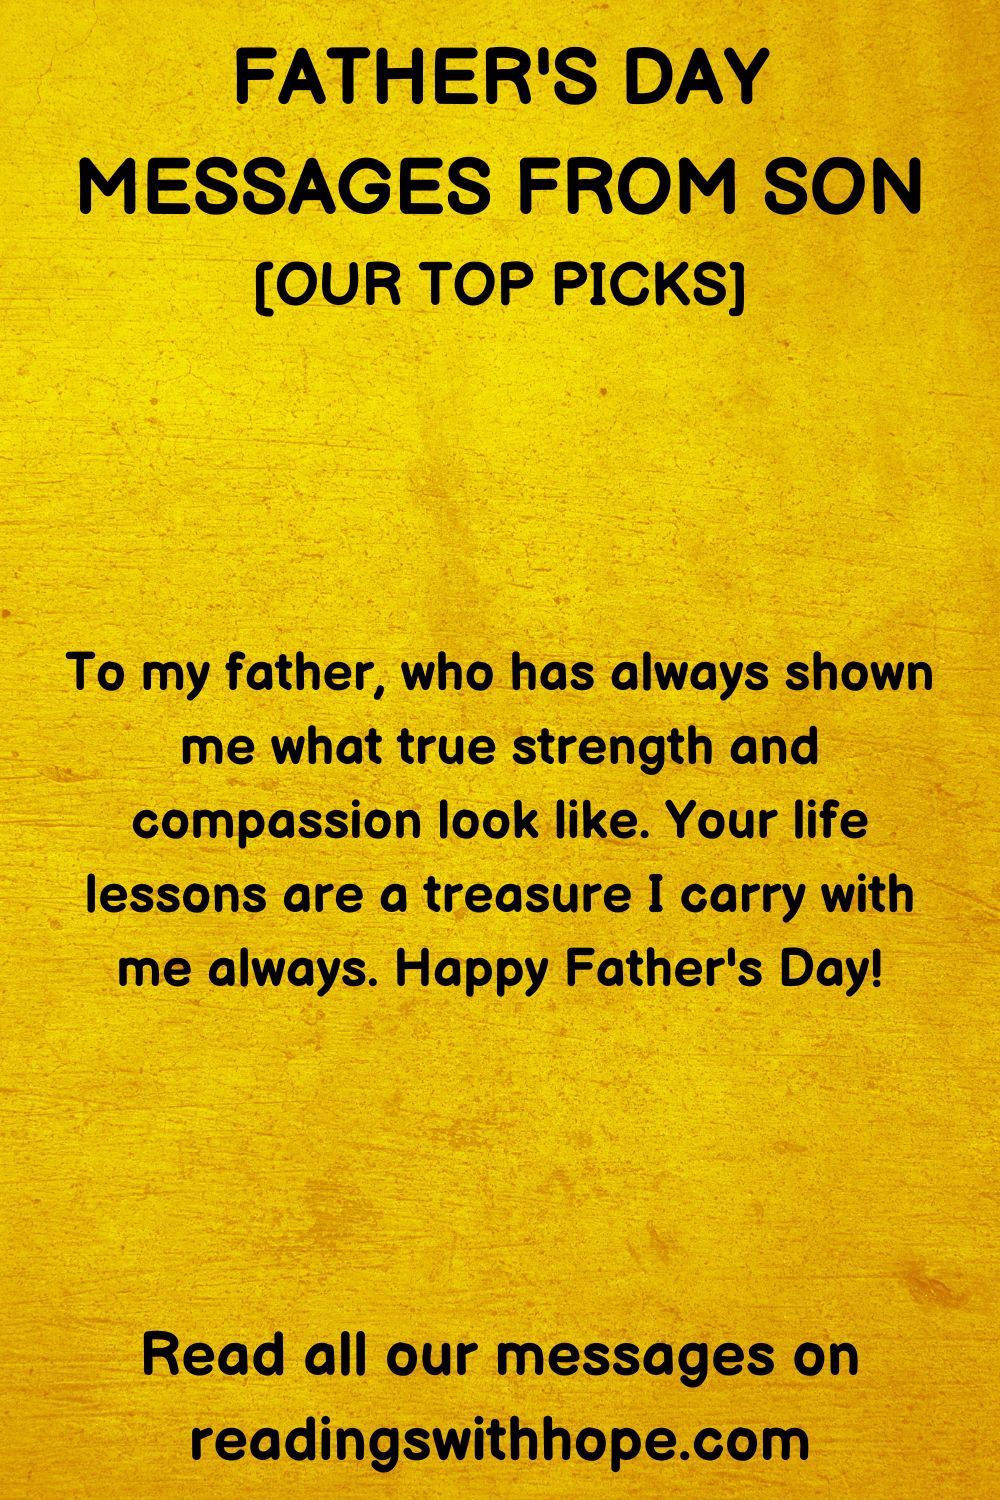 48 Father's Day Messages From Son